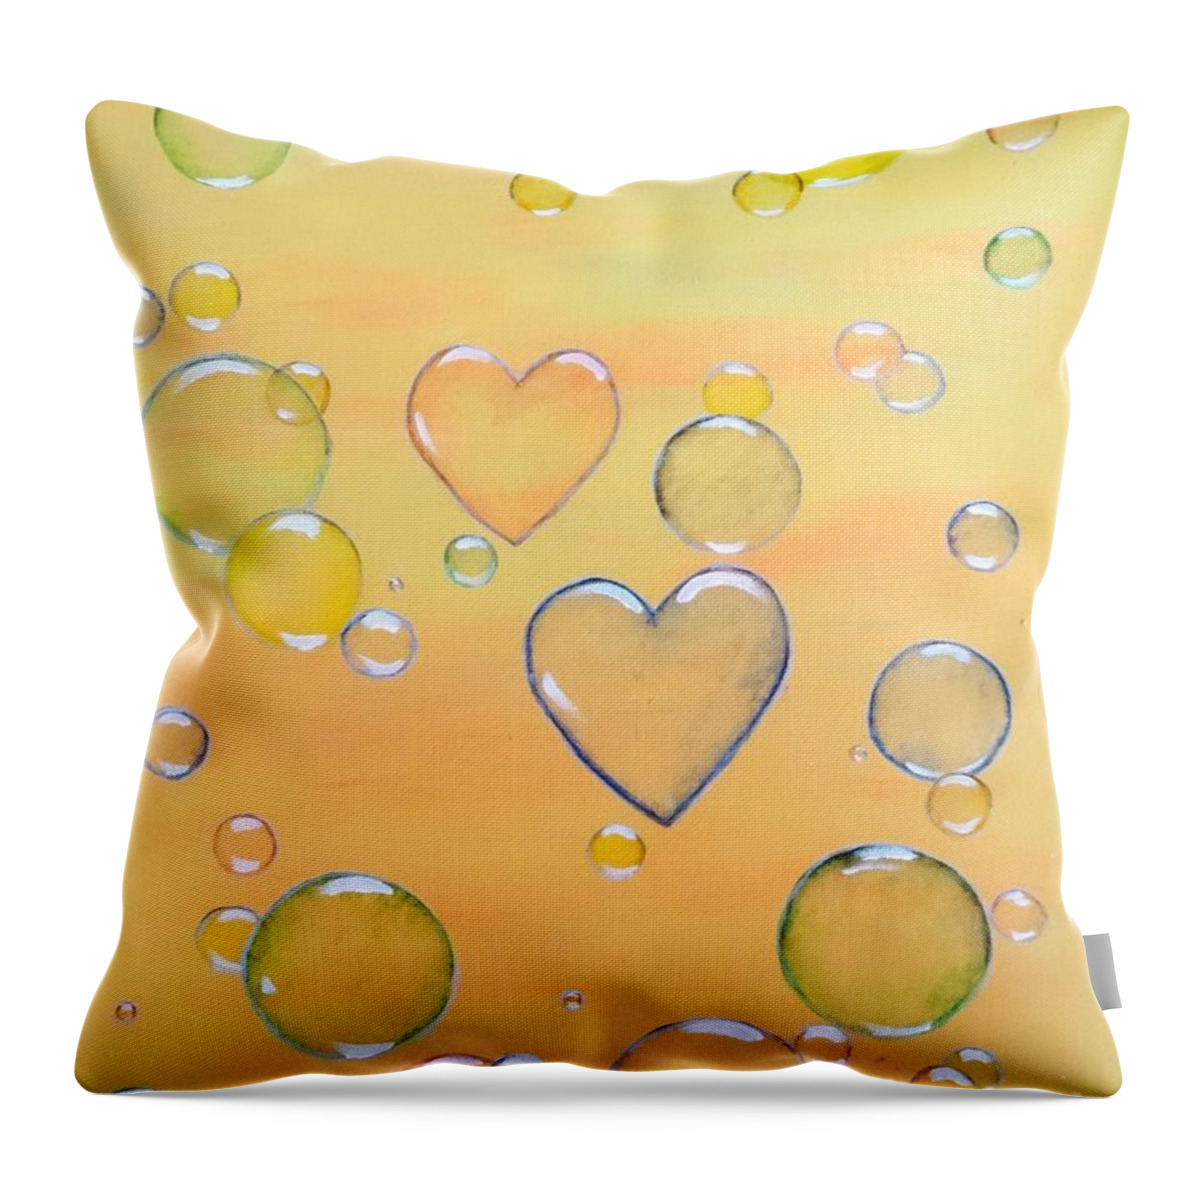 Love Is In The Air Throw Pillow featuring the painting Love is in the Air by Karen Jane Jones